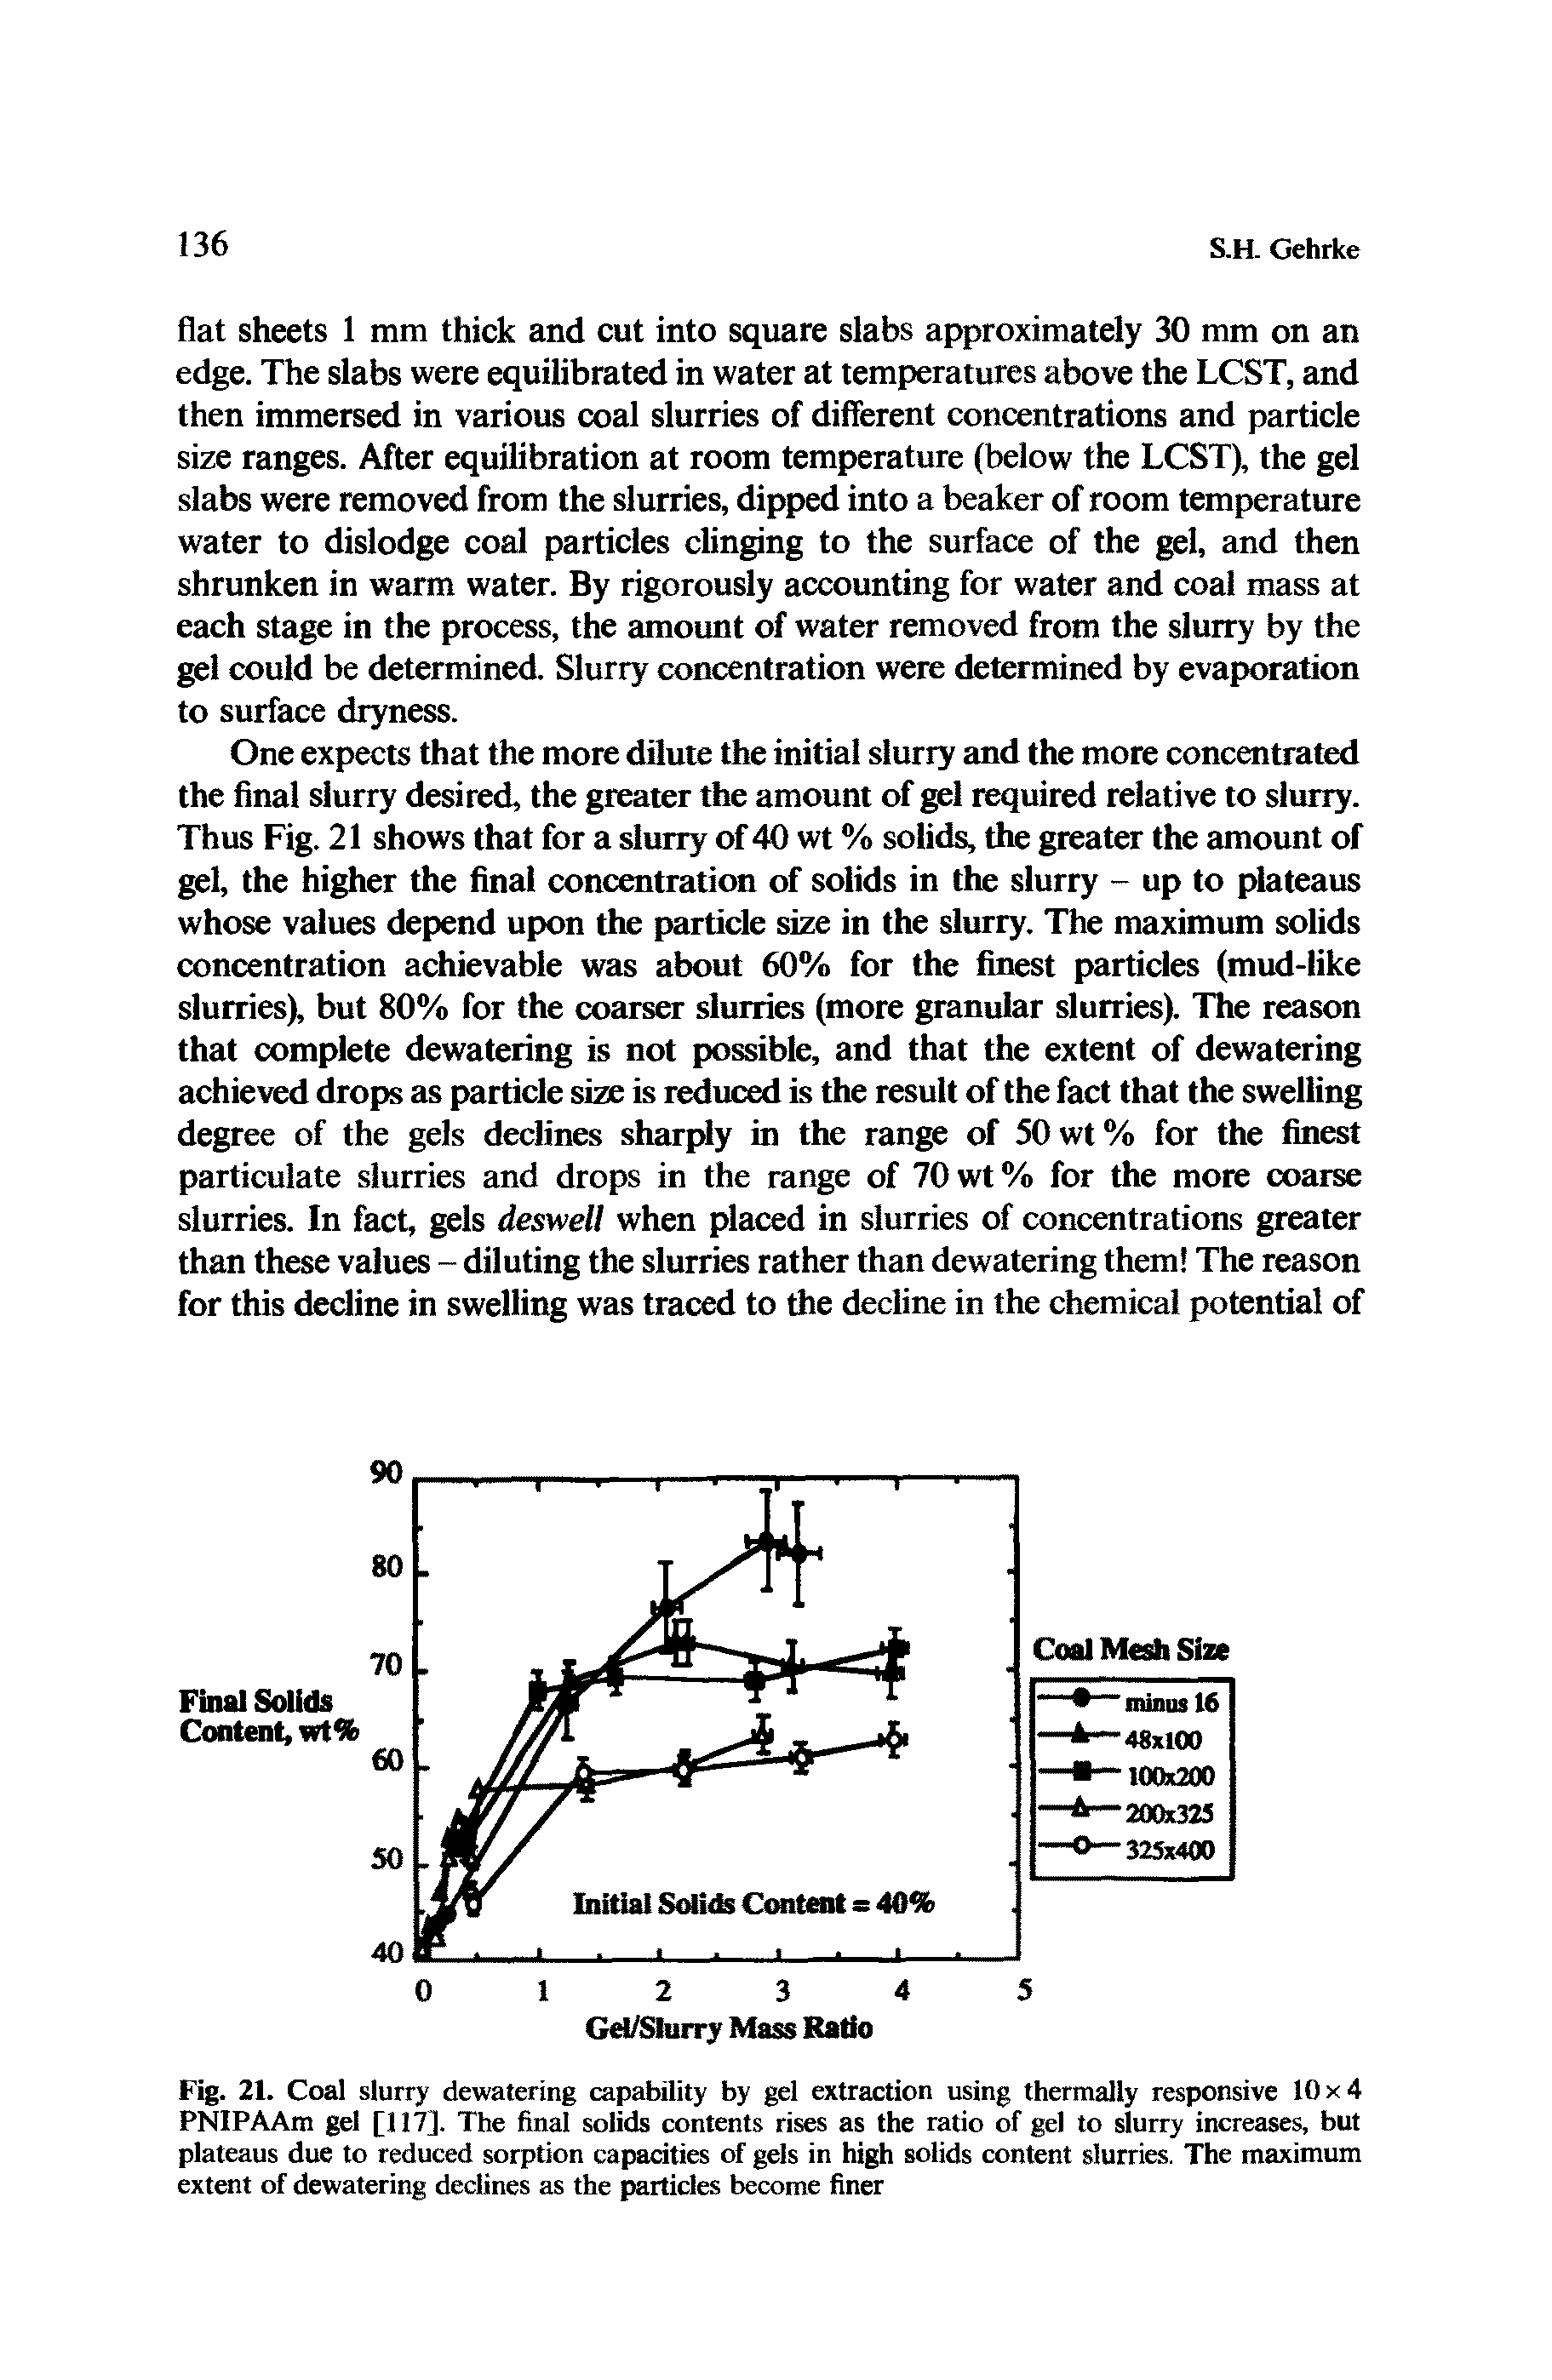 Fig. 21. Coal slurry dewatering capability by gel extraction using thermally responsive 10x4 PNIPAAm gel [117], The final solids contents rises as the ratio of gel to slurry increases, but plateaus due to reduced sorption capacities of gels in high solids content slurries. The maximum extent of dewatering declines as the particles become finer...